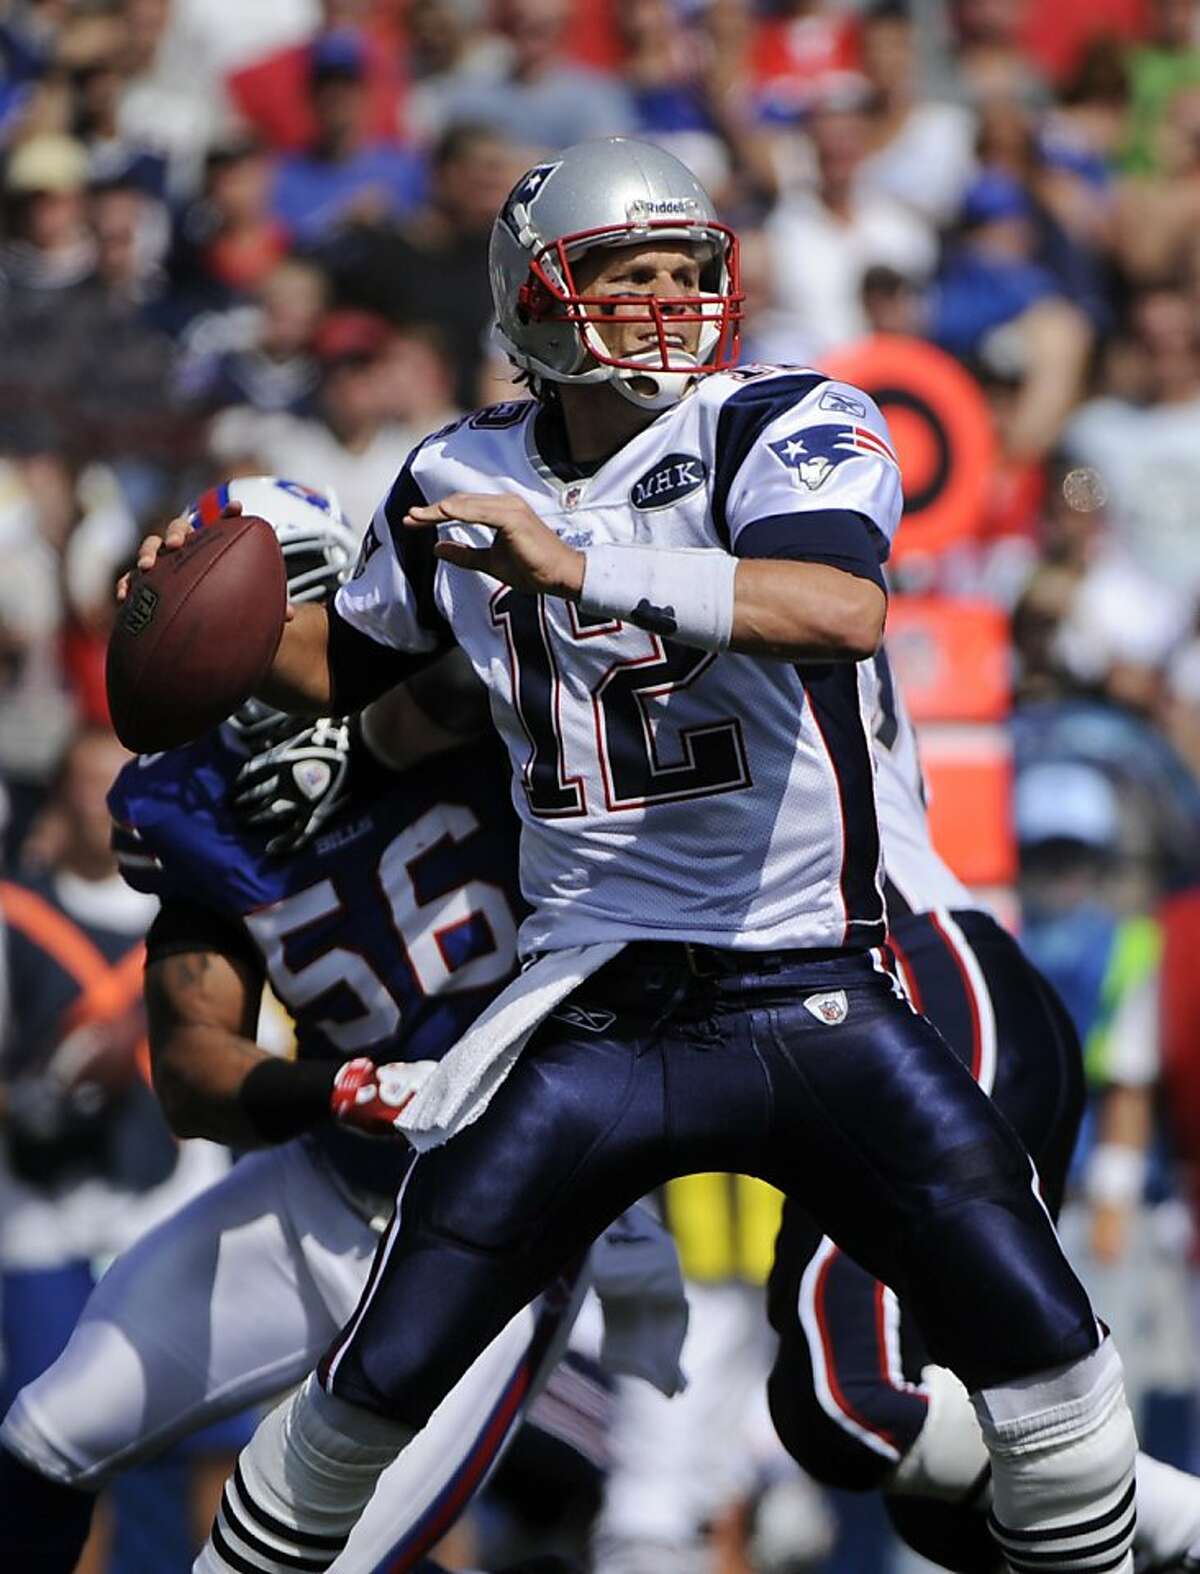 New England Patriots' Tom Brady throws against the Buffalo Bills during the second half of an NFL football game in Orchard Park, N.Y., Sunday, Sept. 25, 2011. (AP Photo/Gary Wiepert)